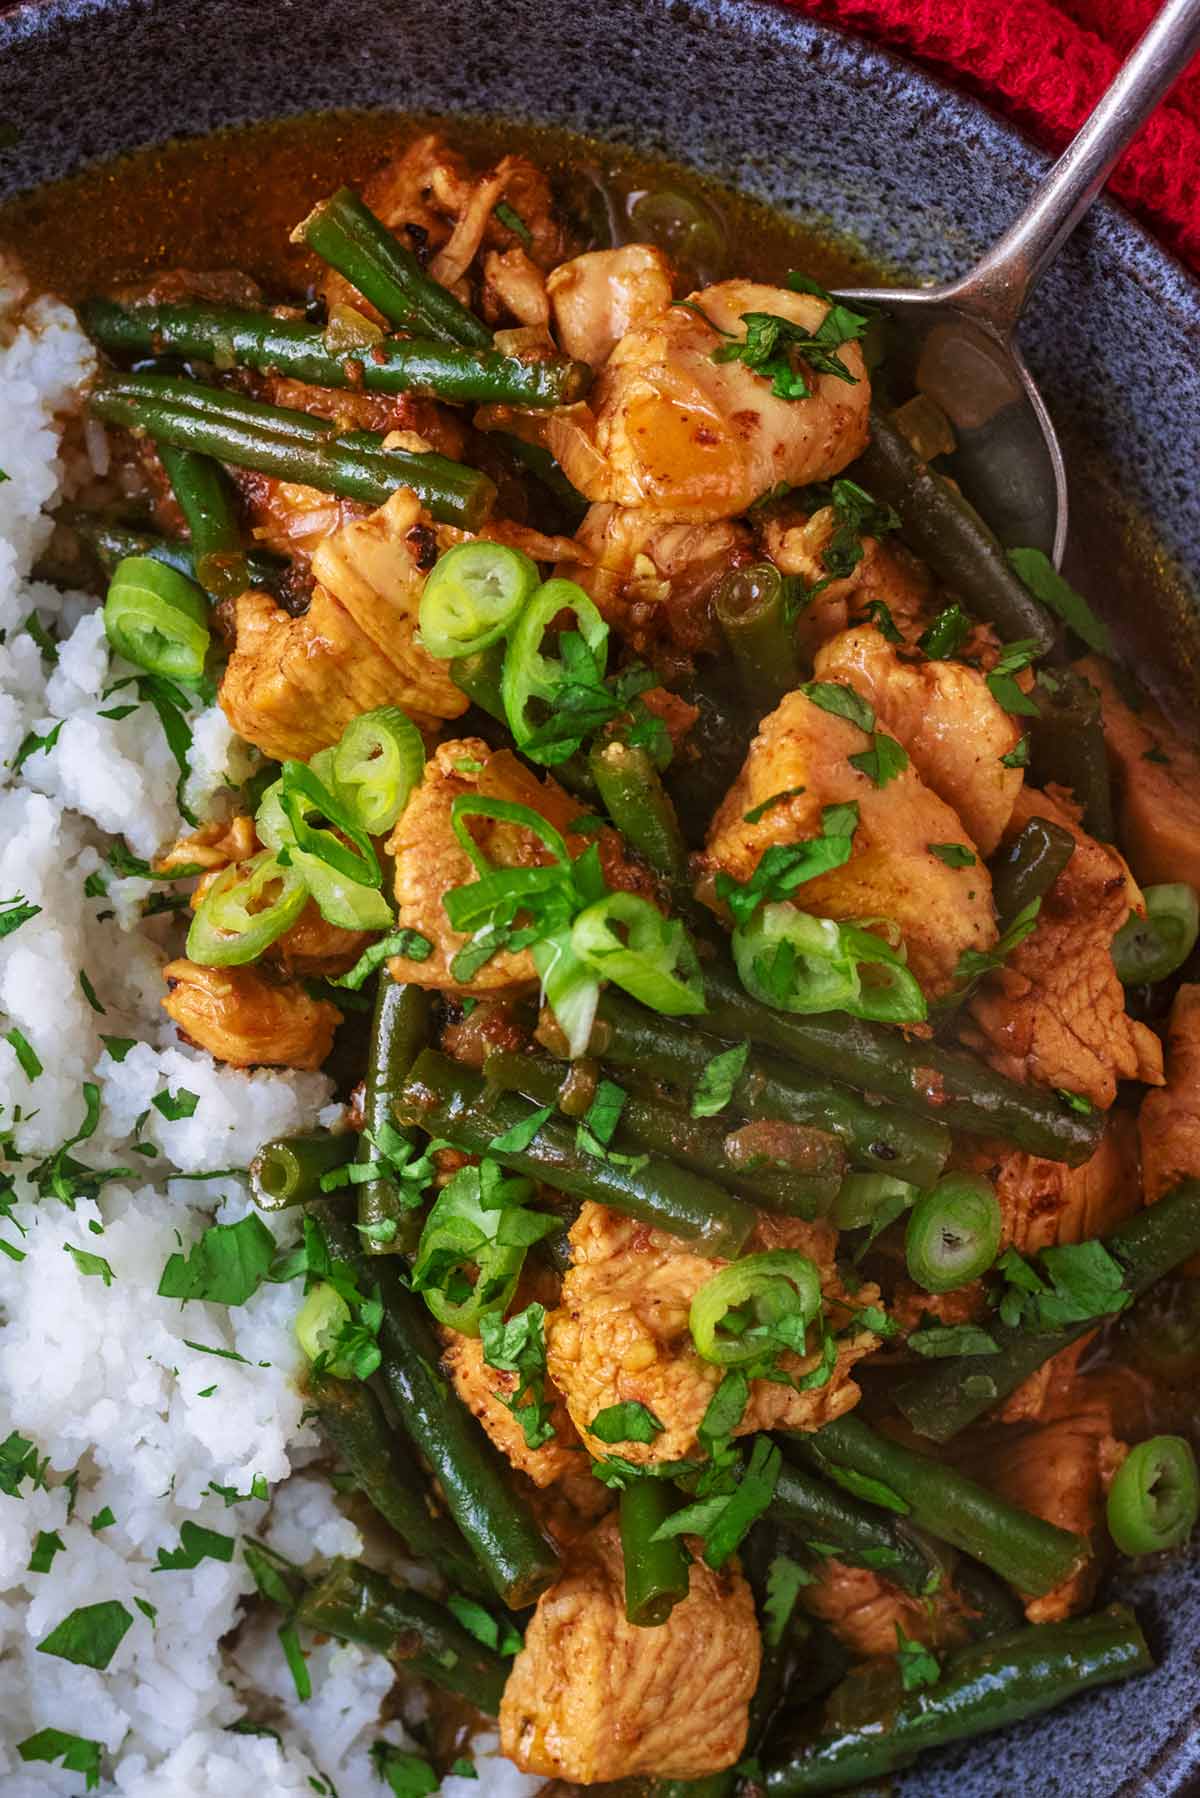 Chicken and green beans in a Chinese curry sauce.